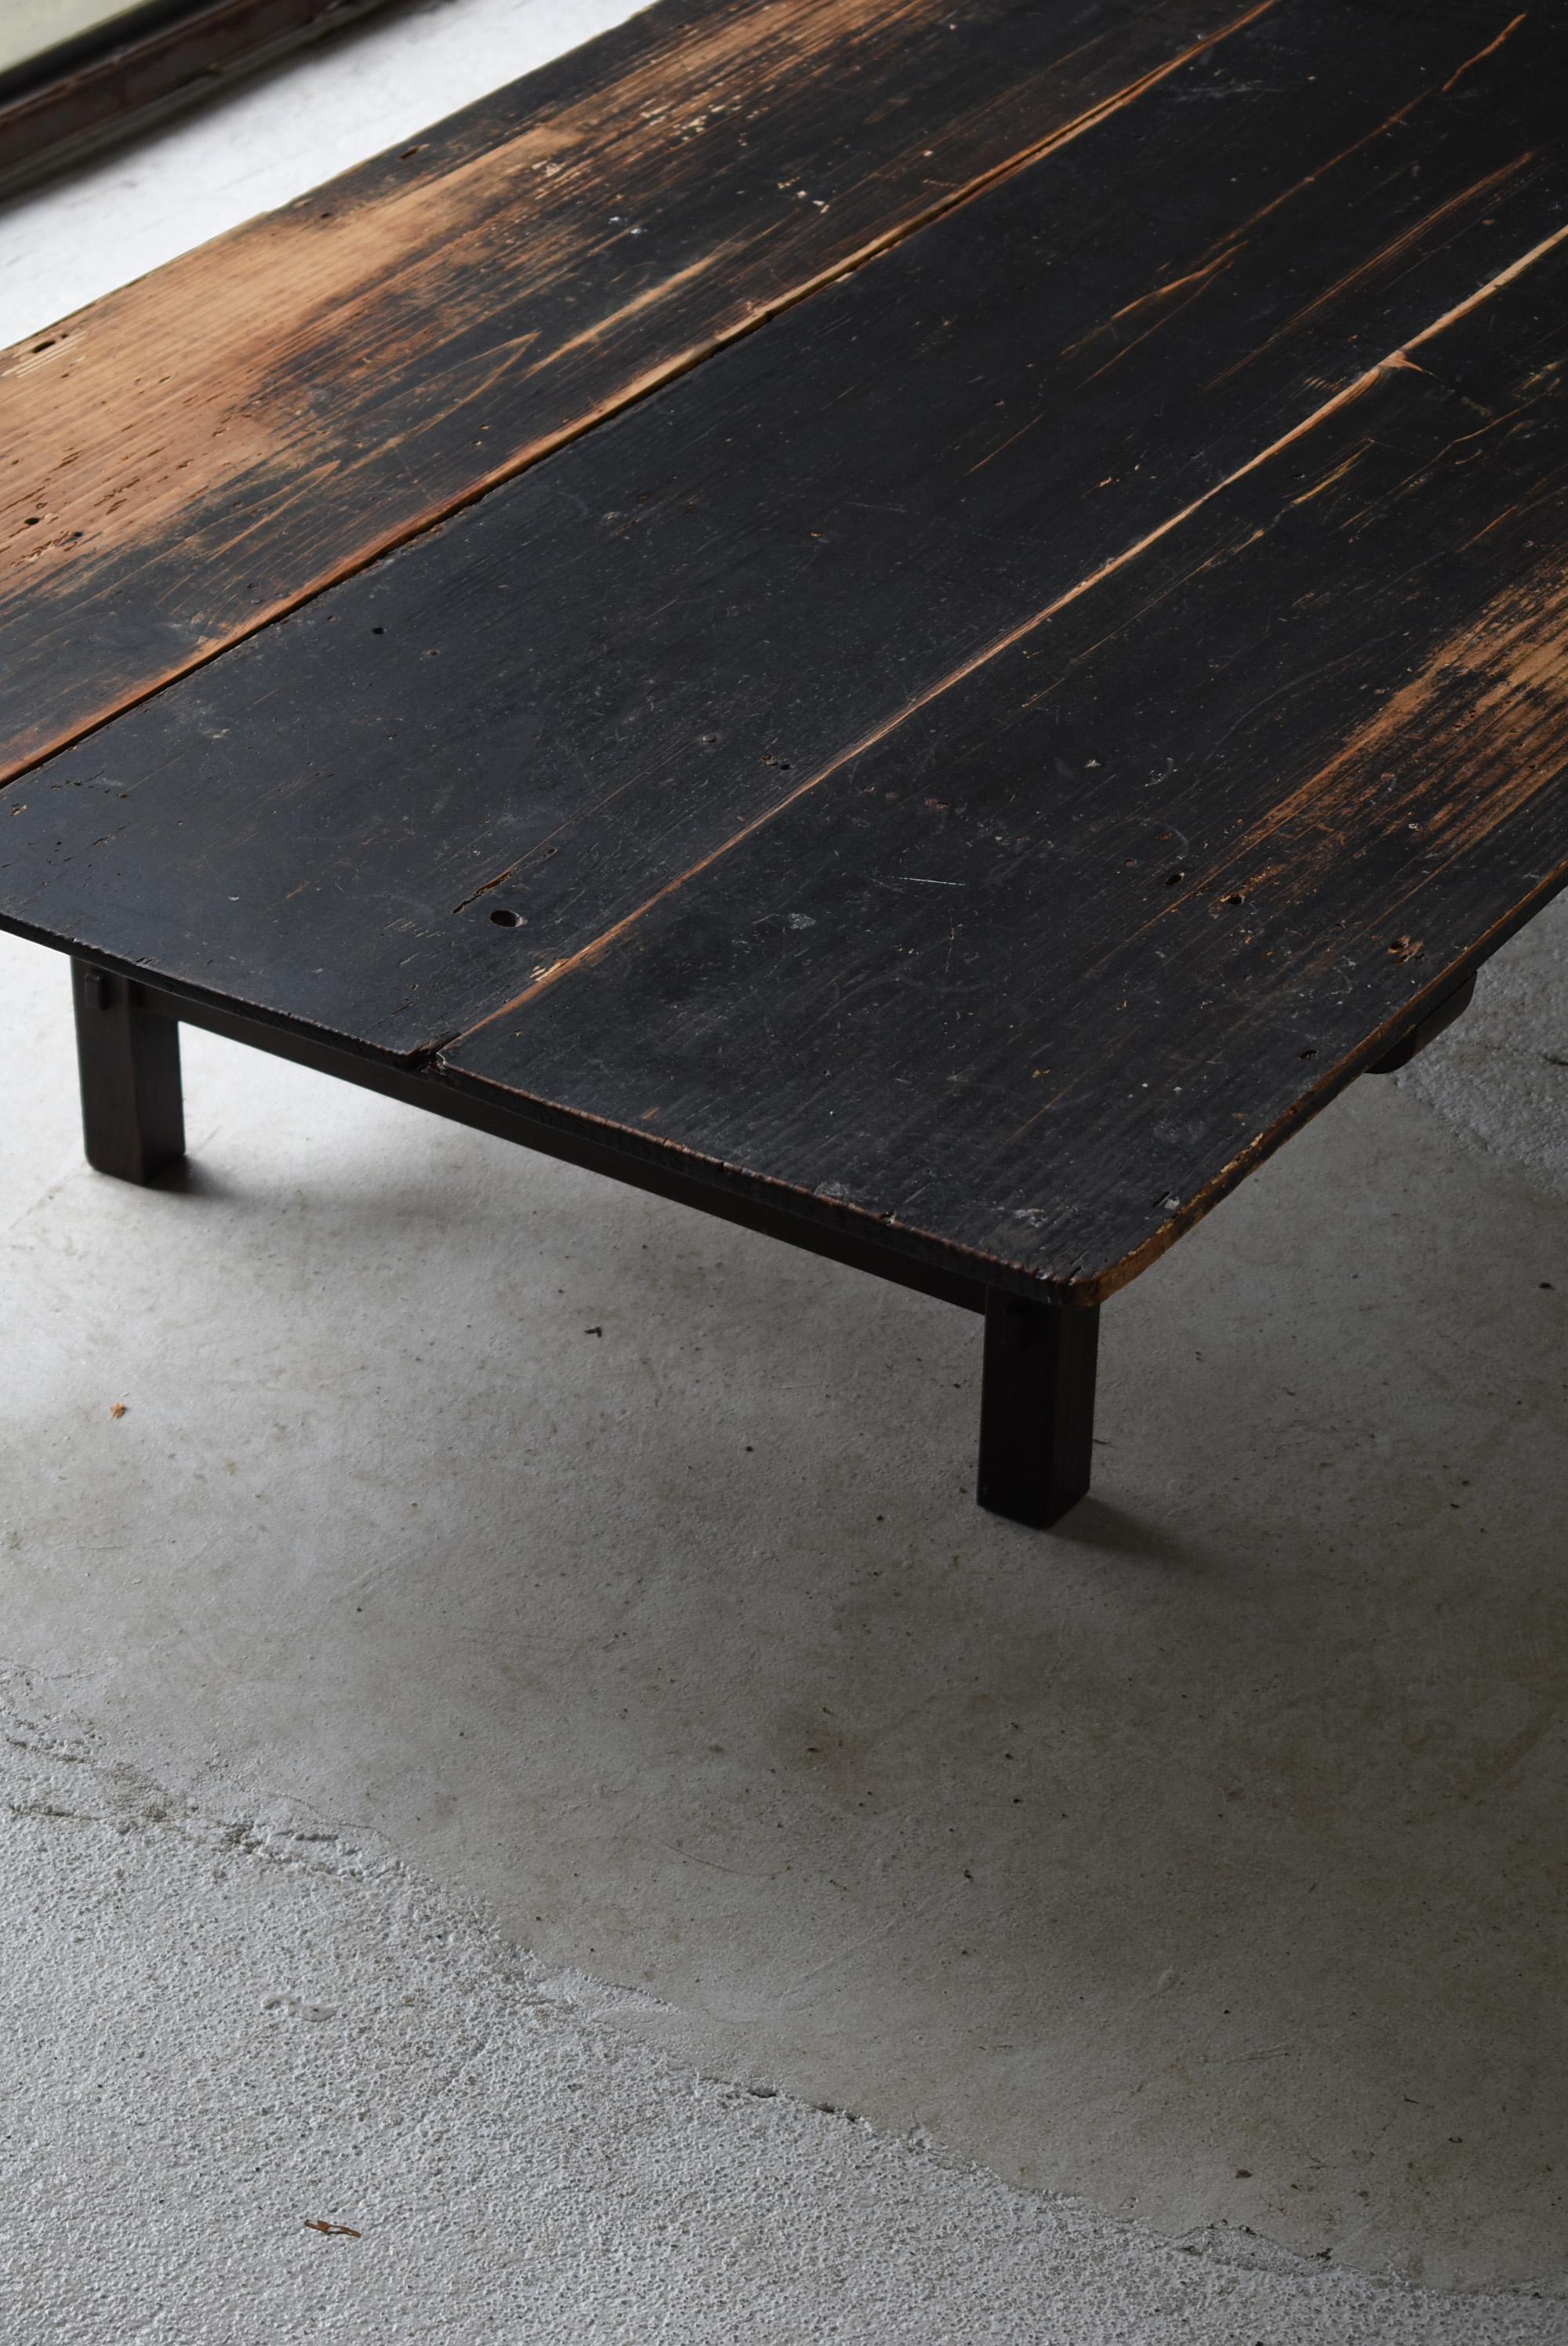 It is a low table of the Meiji period (1860-1920).
Originally, the lifestyle on the floor was basic in Japan.
Since 1920, foreign cultures have entered Japan, reducing the lifestyle of sitting on the floor.
As a result, you no longer need such a